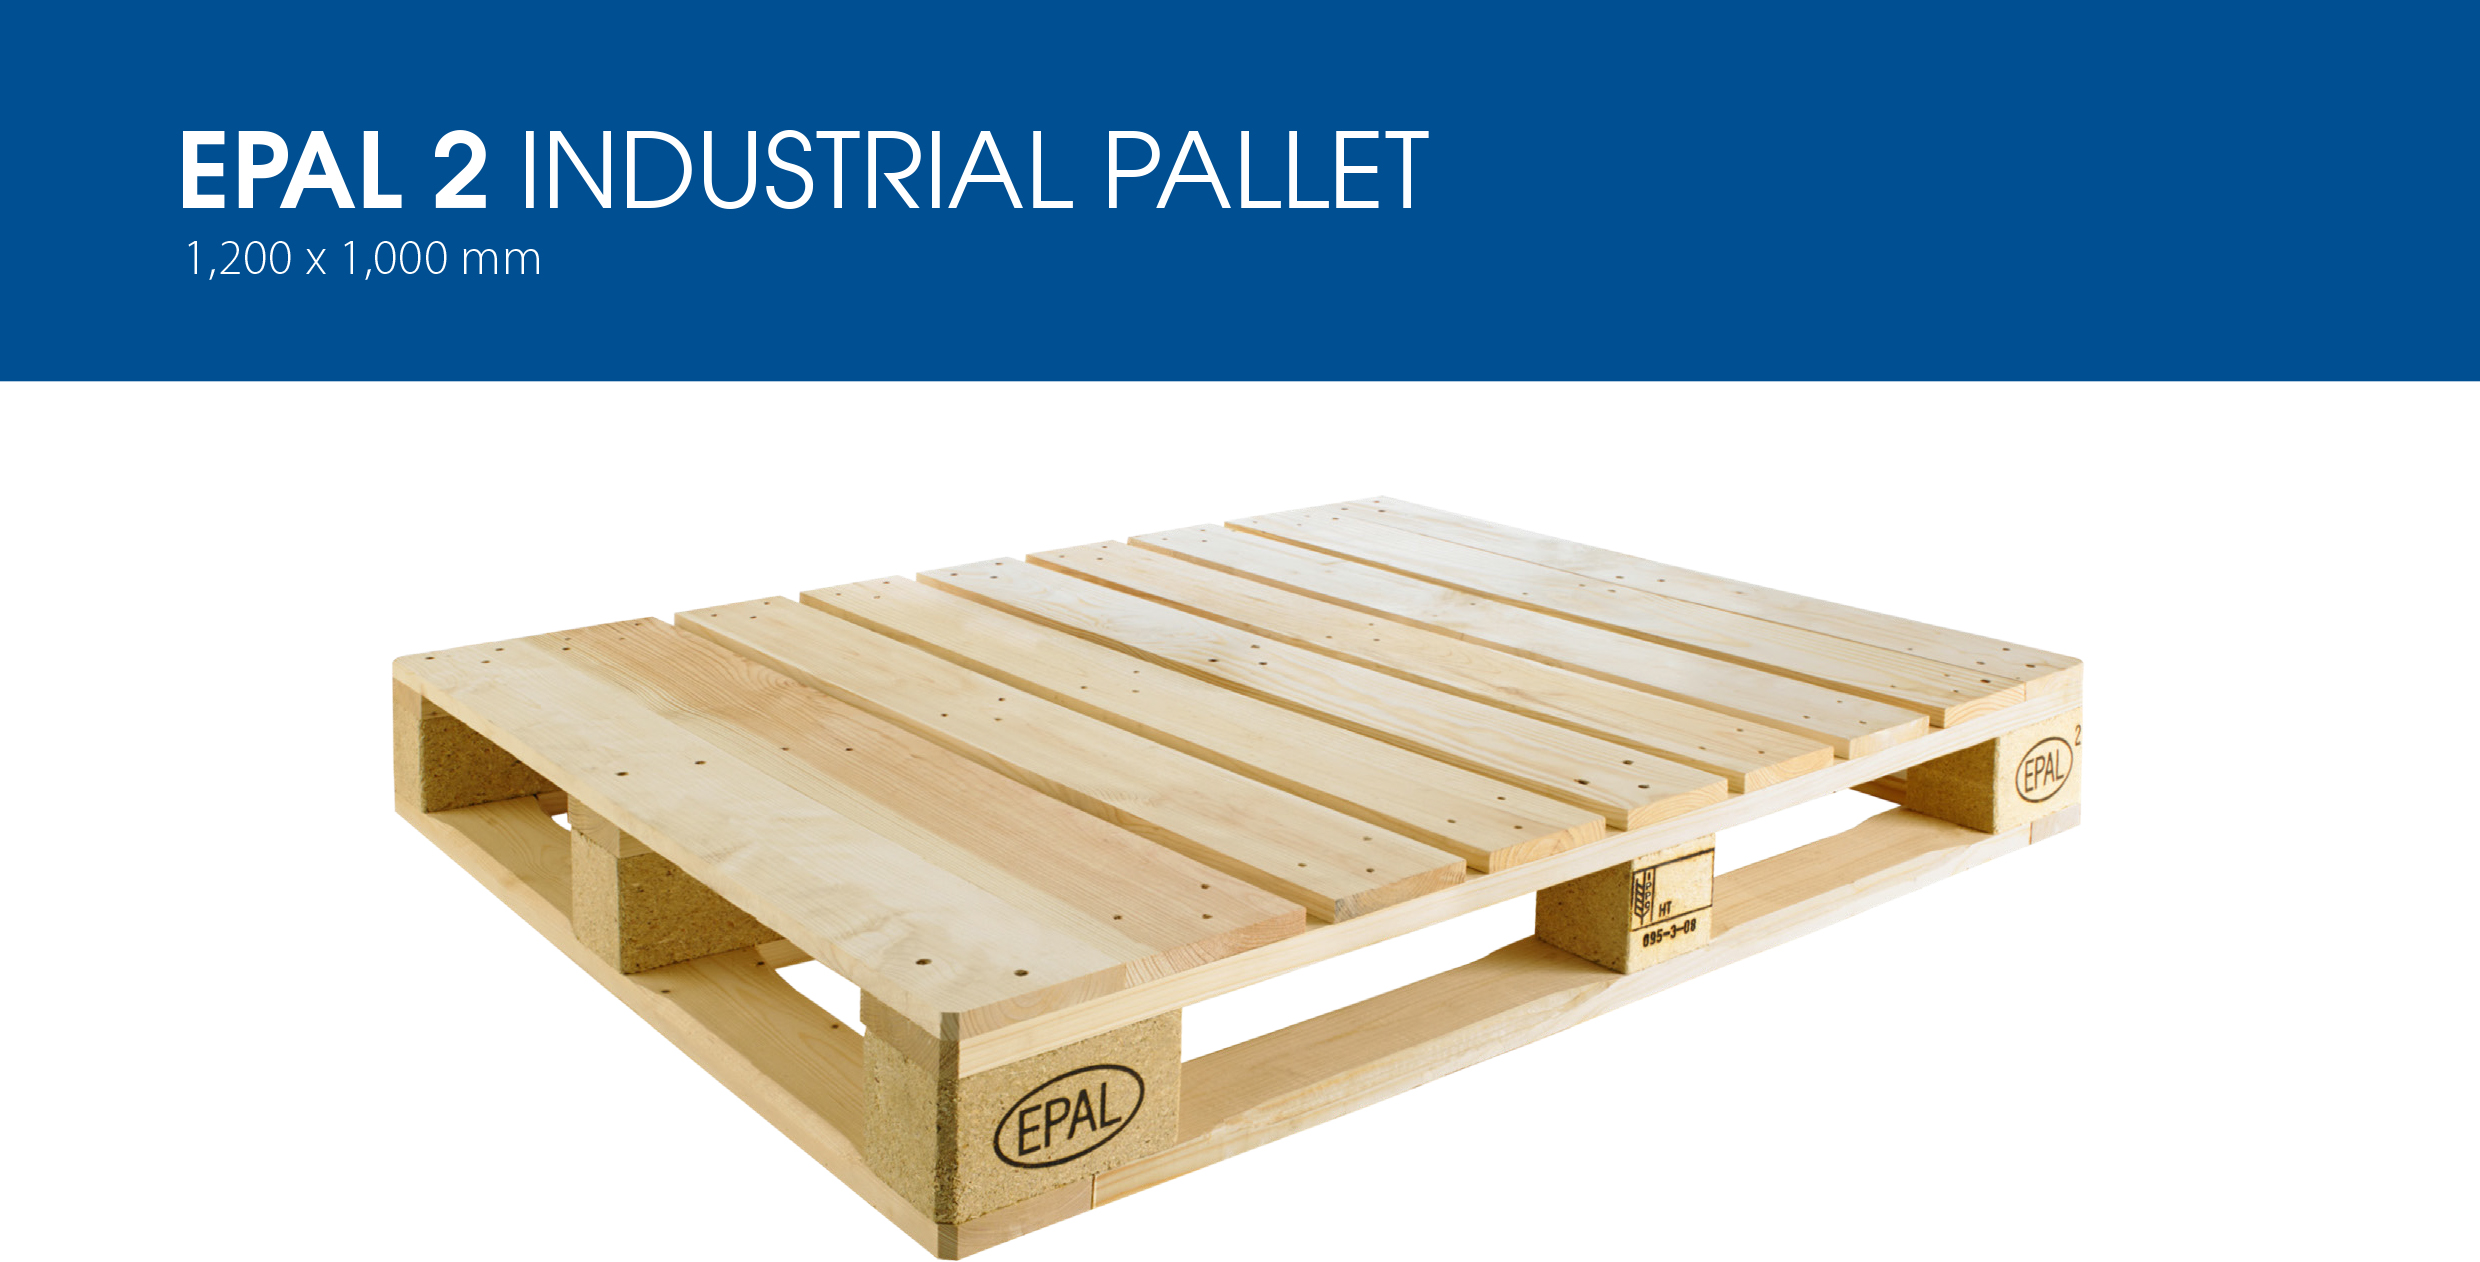 epal 2 indusrial pallet